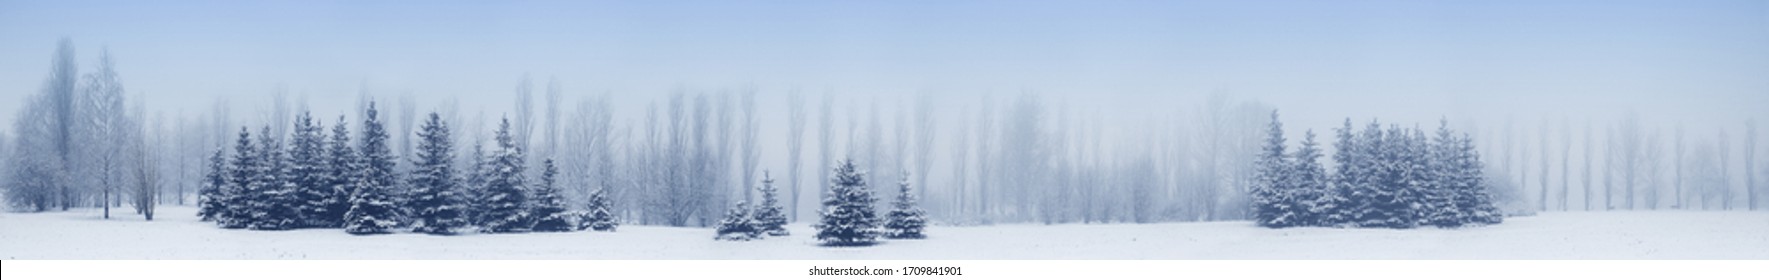 Panorama.
Snow Covered Christmas Trees.
Winter landscape in Russia. - Powered by Shutterstock